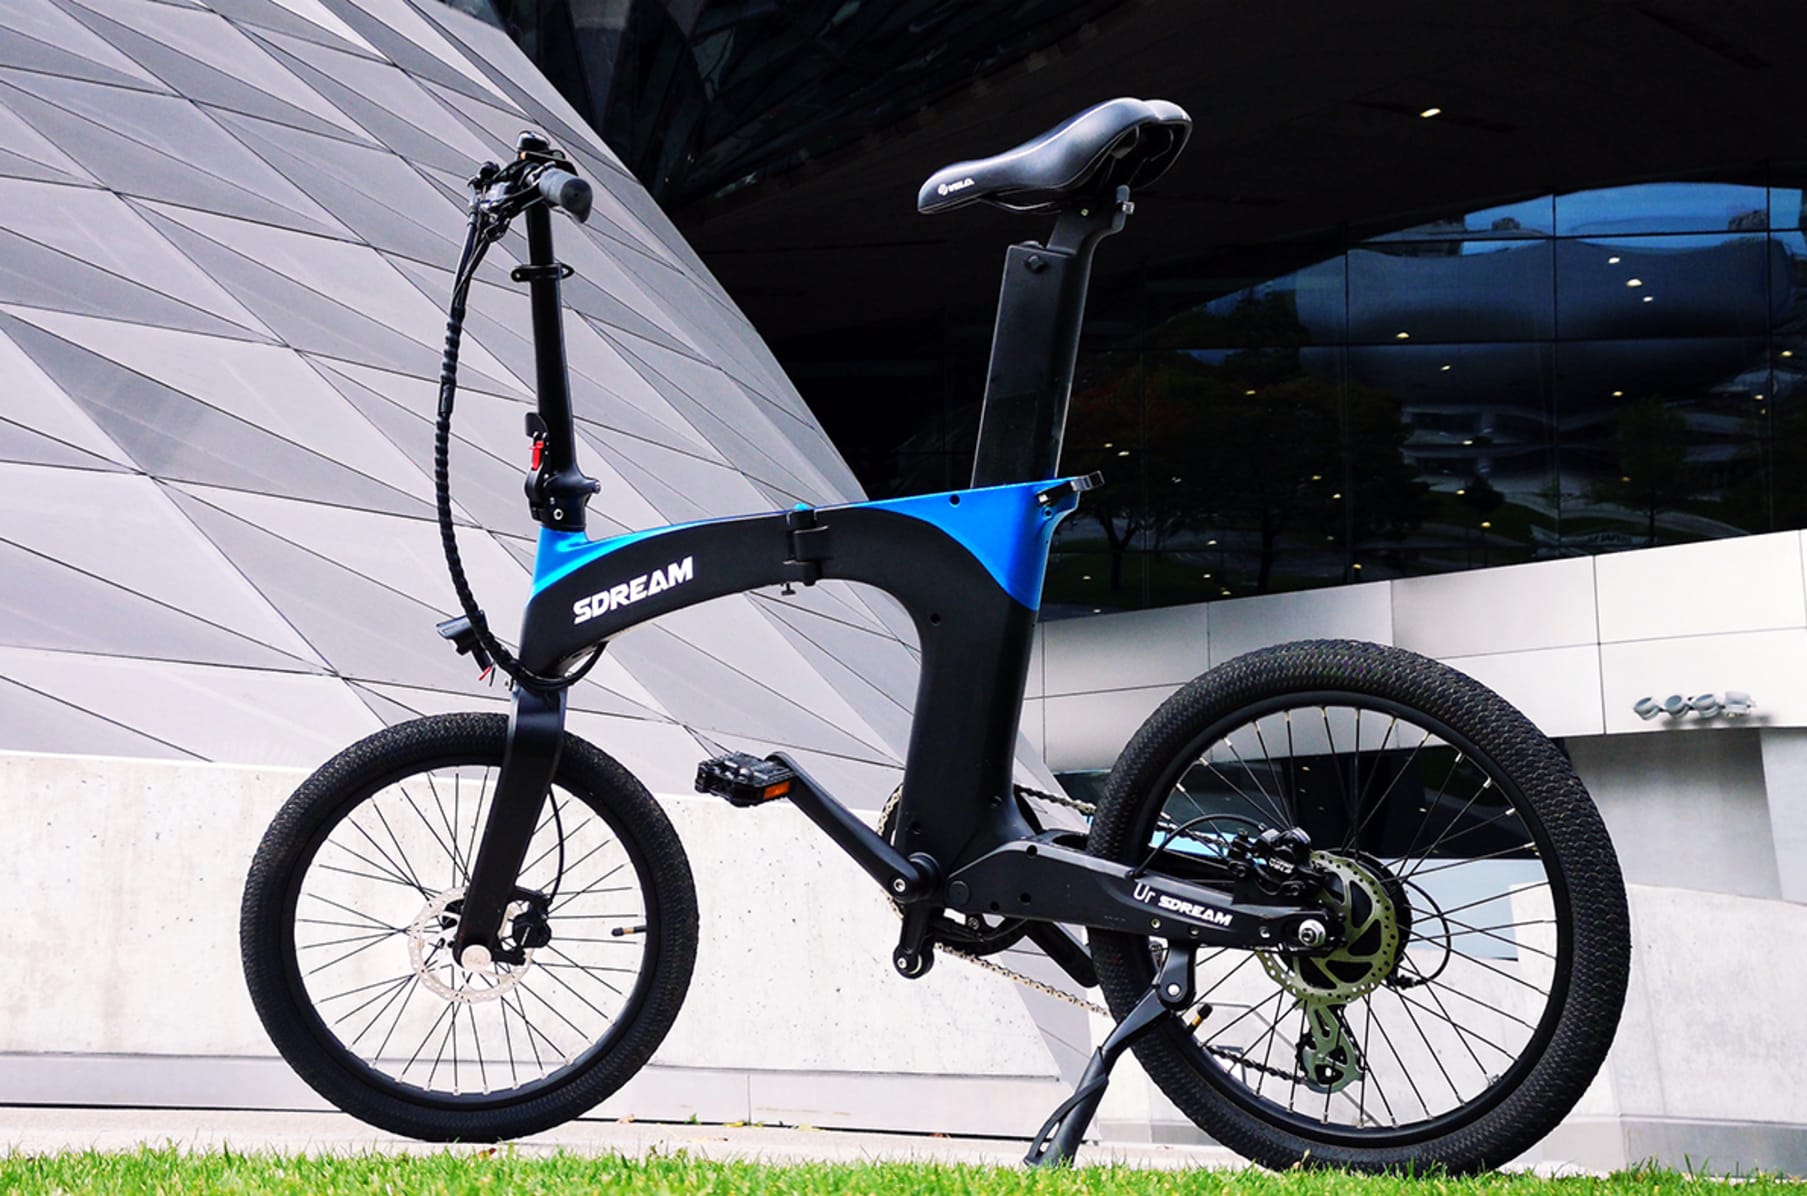 sdream-ur-500x-foldable-e-bike-offers-the-smoothest-ride-anywhere